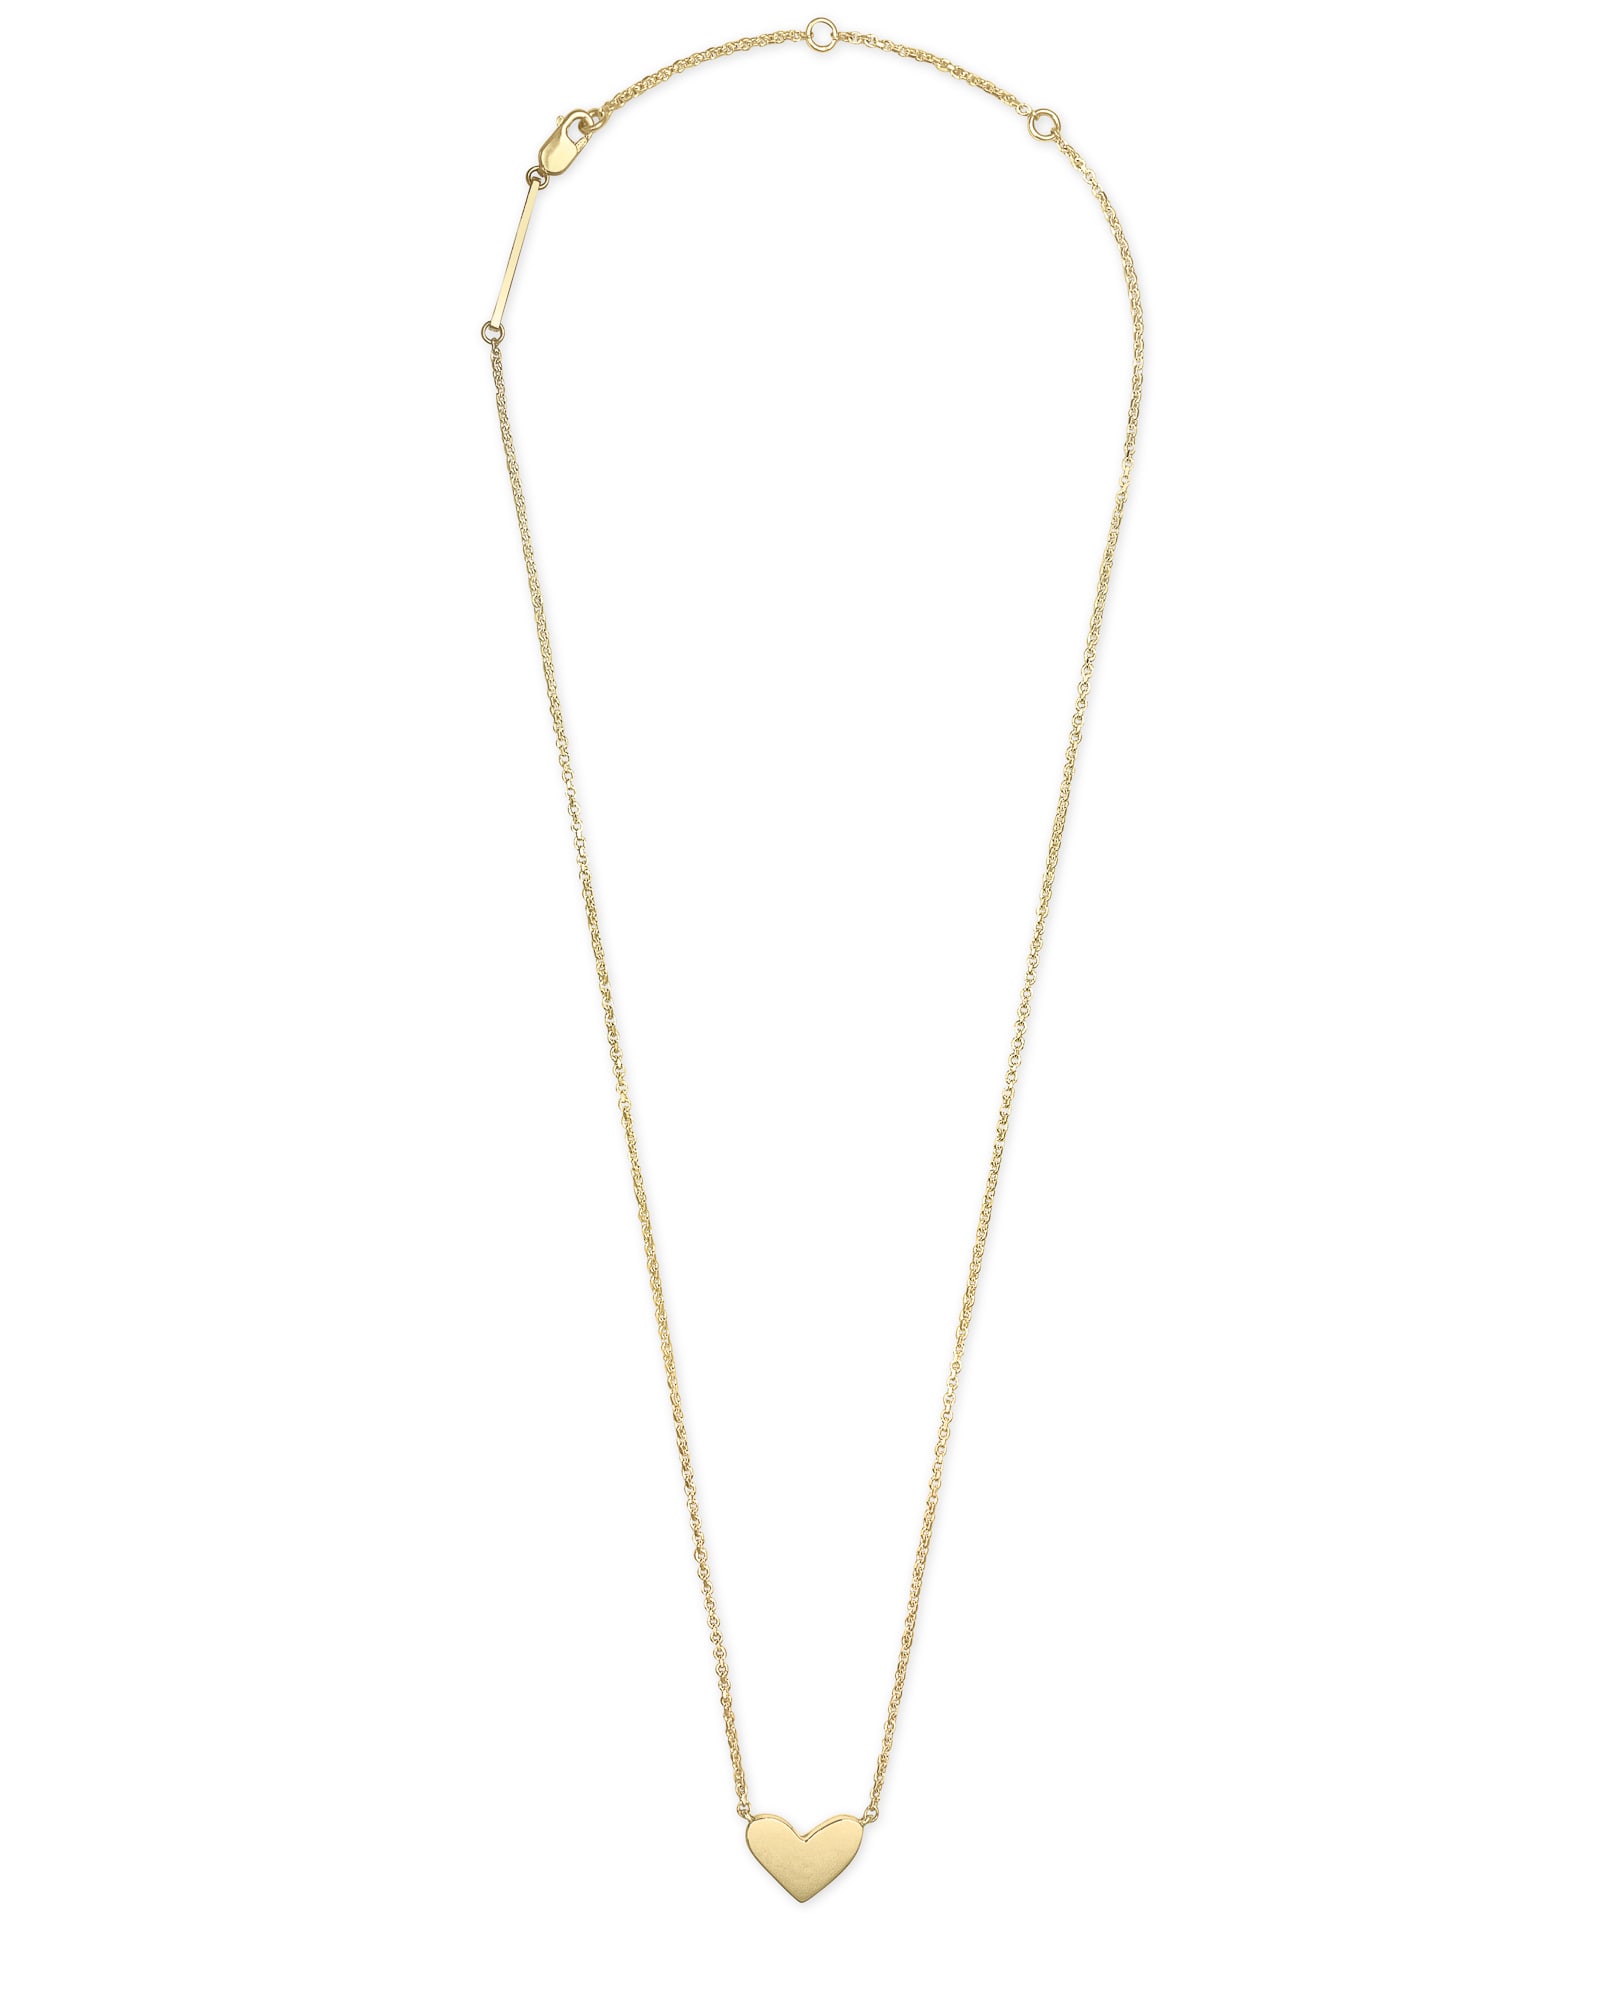 Designer Layered Heart Necklace Set For Women Set With 18k Gold And Silver  Plated Chain, Dainty Gold Choker, Arrow Bar, And Long Pendant For Women  From Premiumjewelrystore, $41.61